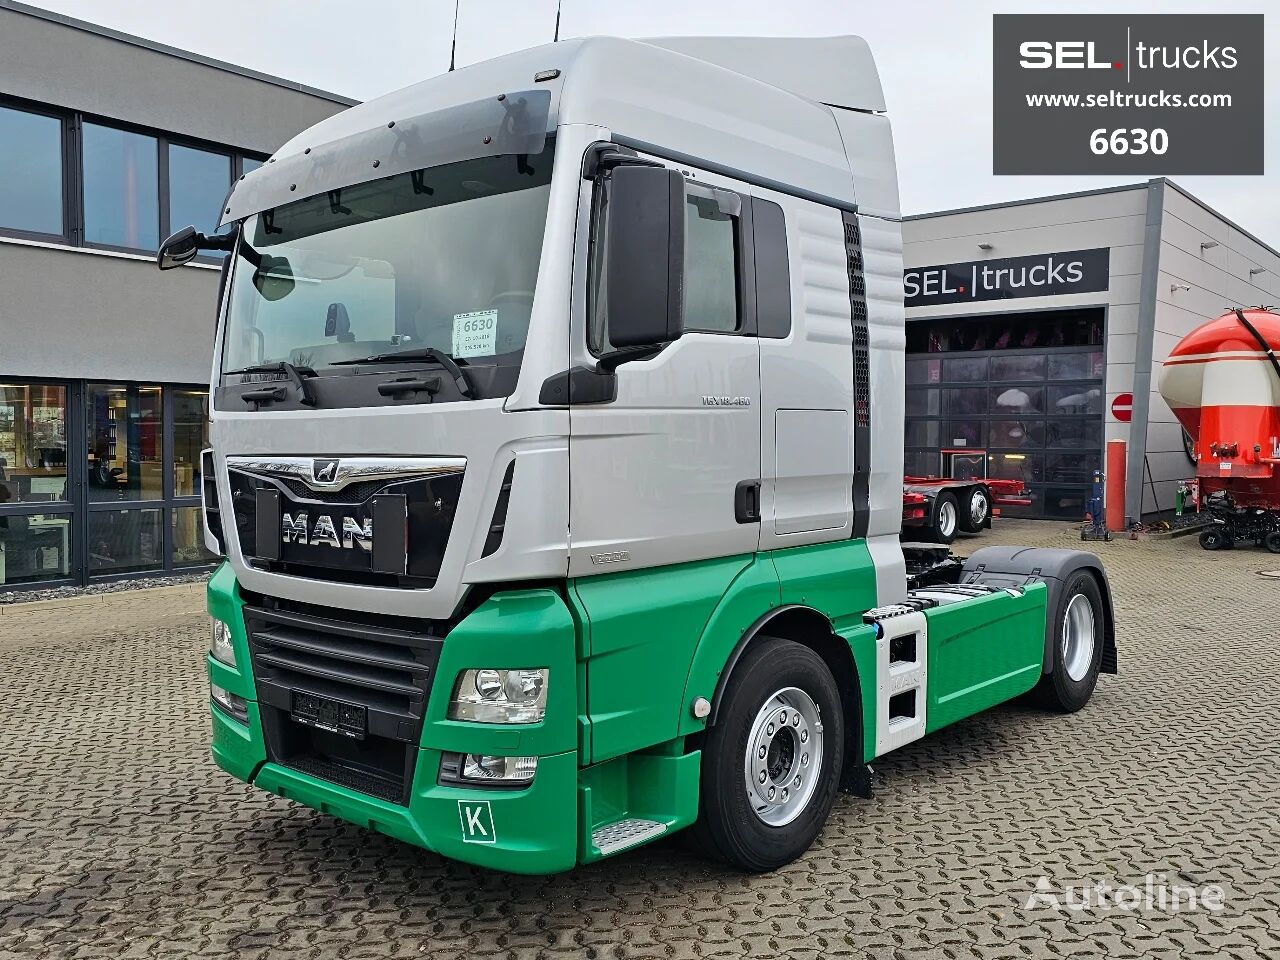 Man Tgx 18460 4x2 Bls Zf Intarder 2 Tanks Adr At Xenon Truck Tractor For Sale Germany 3993